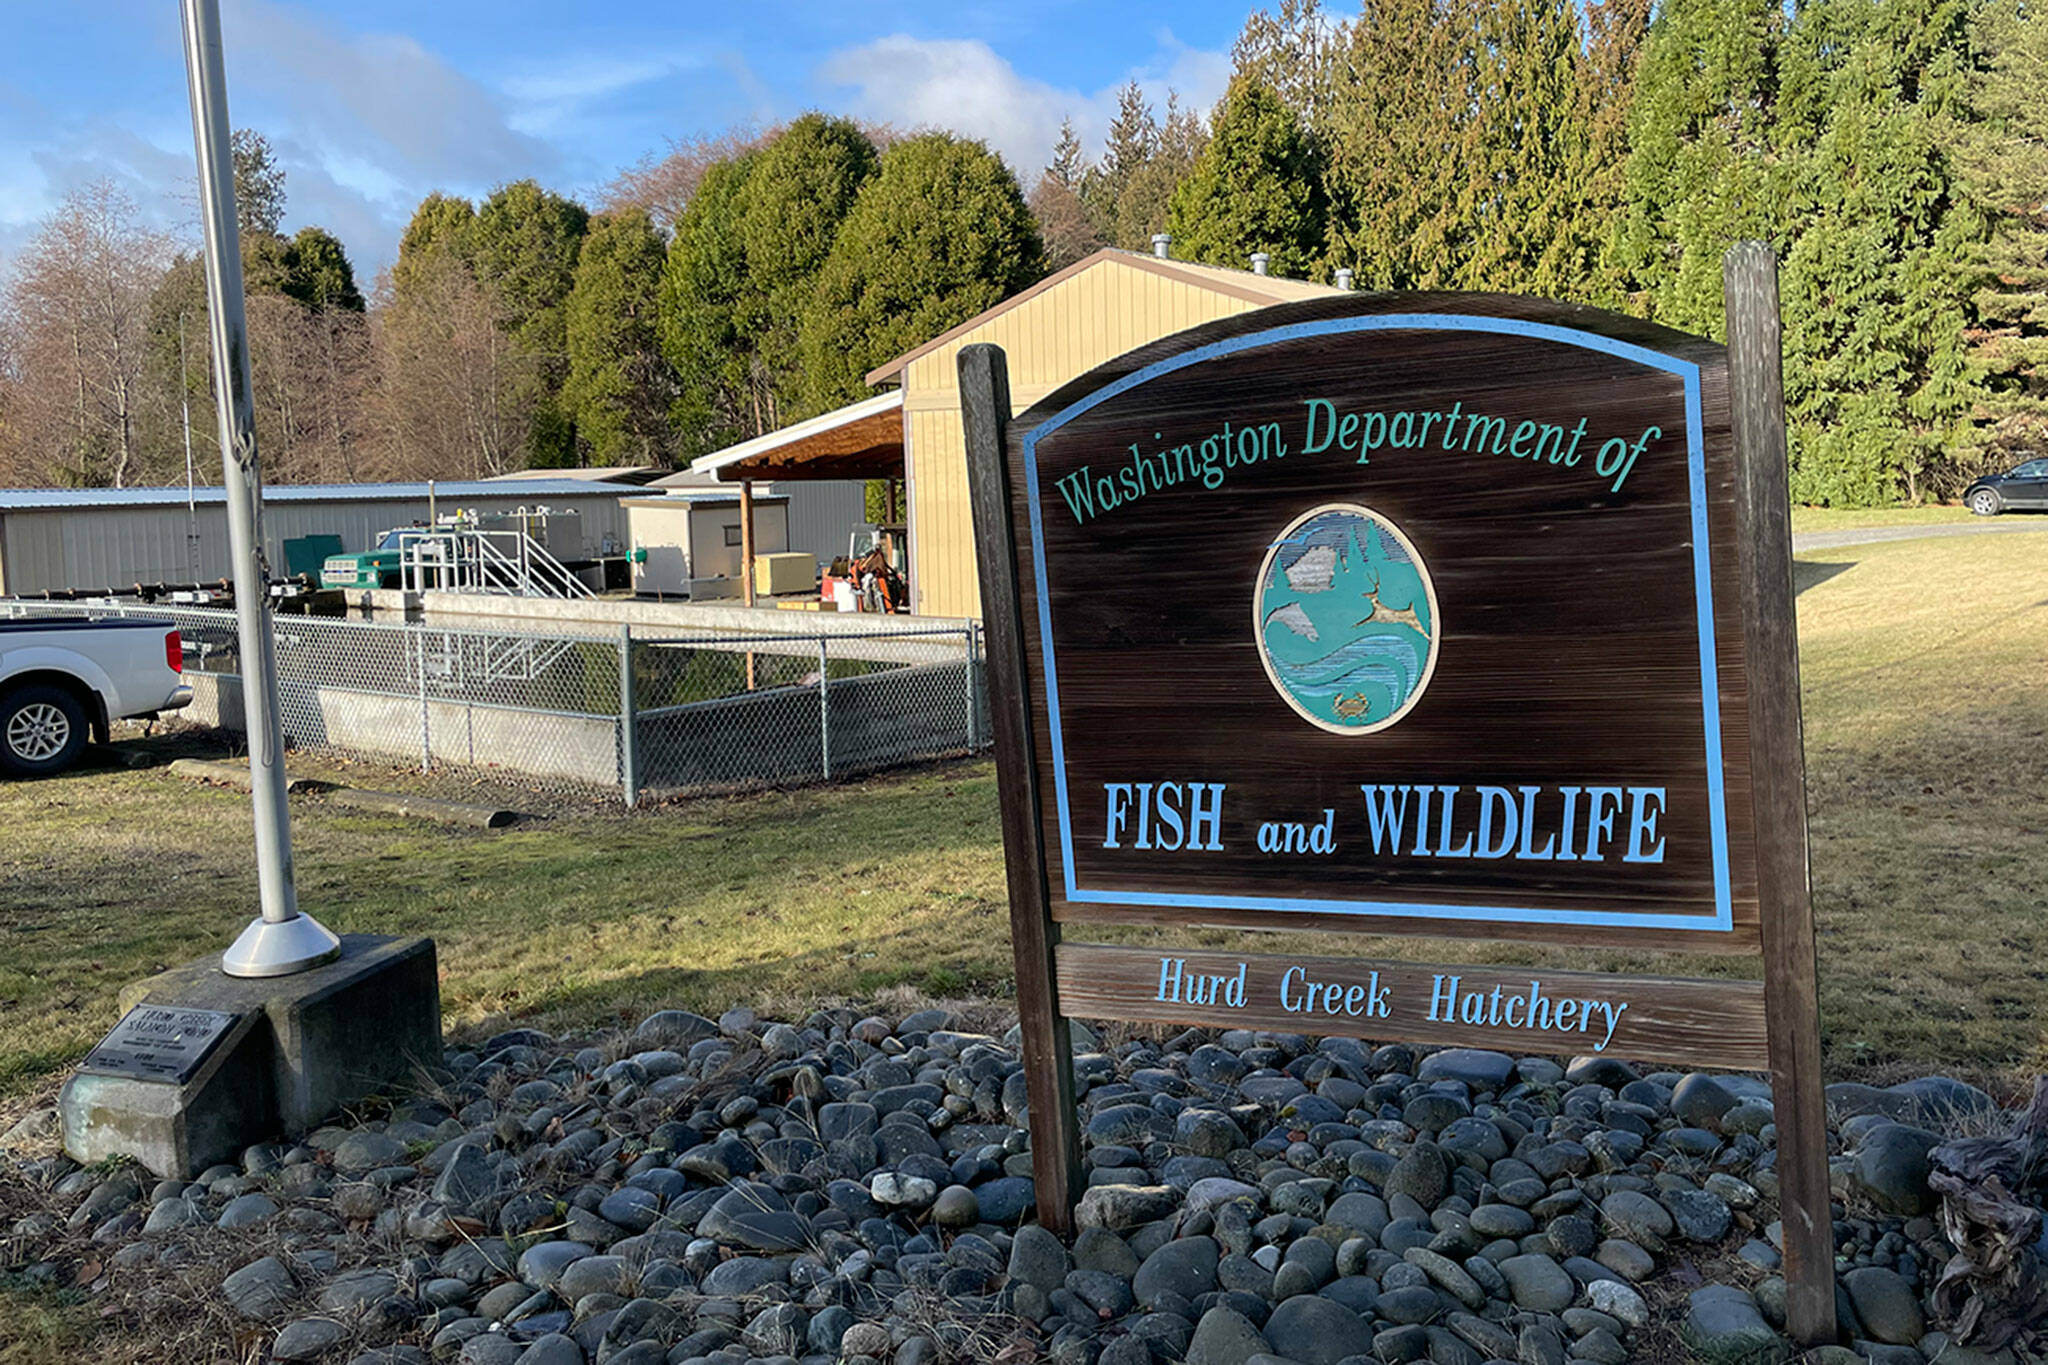 Sequim Gazette photo by Matthew Nash/ Hurd Creek Hatchery became state operated in 1980 and will soon be relocated nearby on Fasola Road out of the Dungeness River’s high risk floodplain. it flooded in 2015 and saw fish be prematurely released, and the hatchery building was damaged.